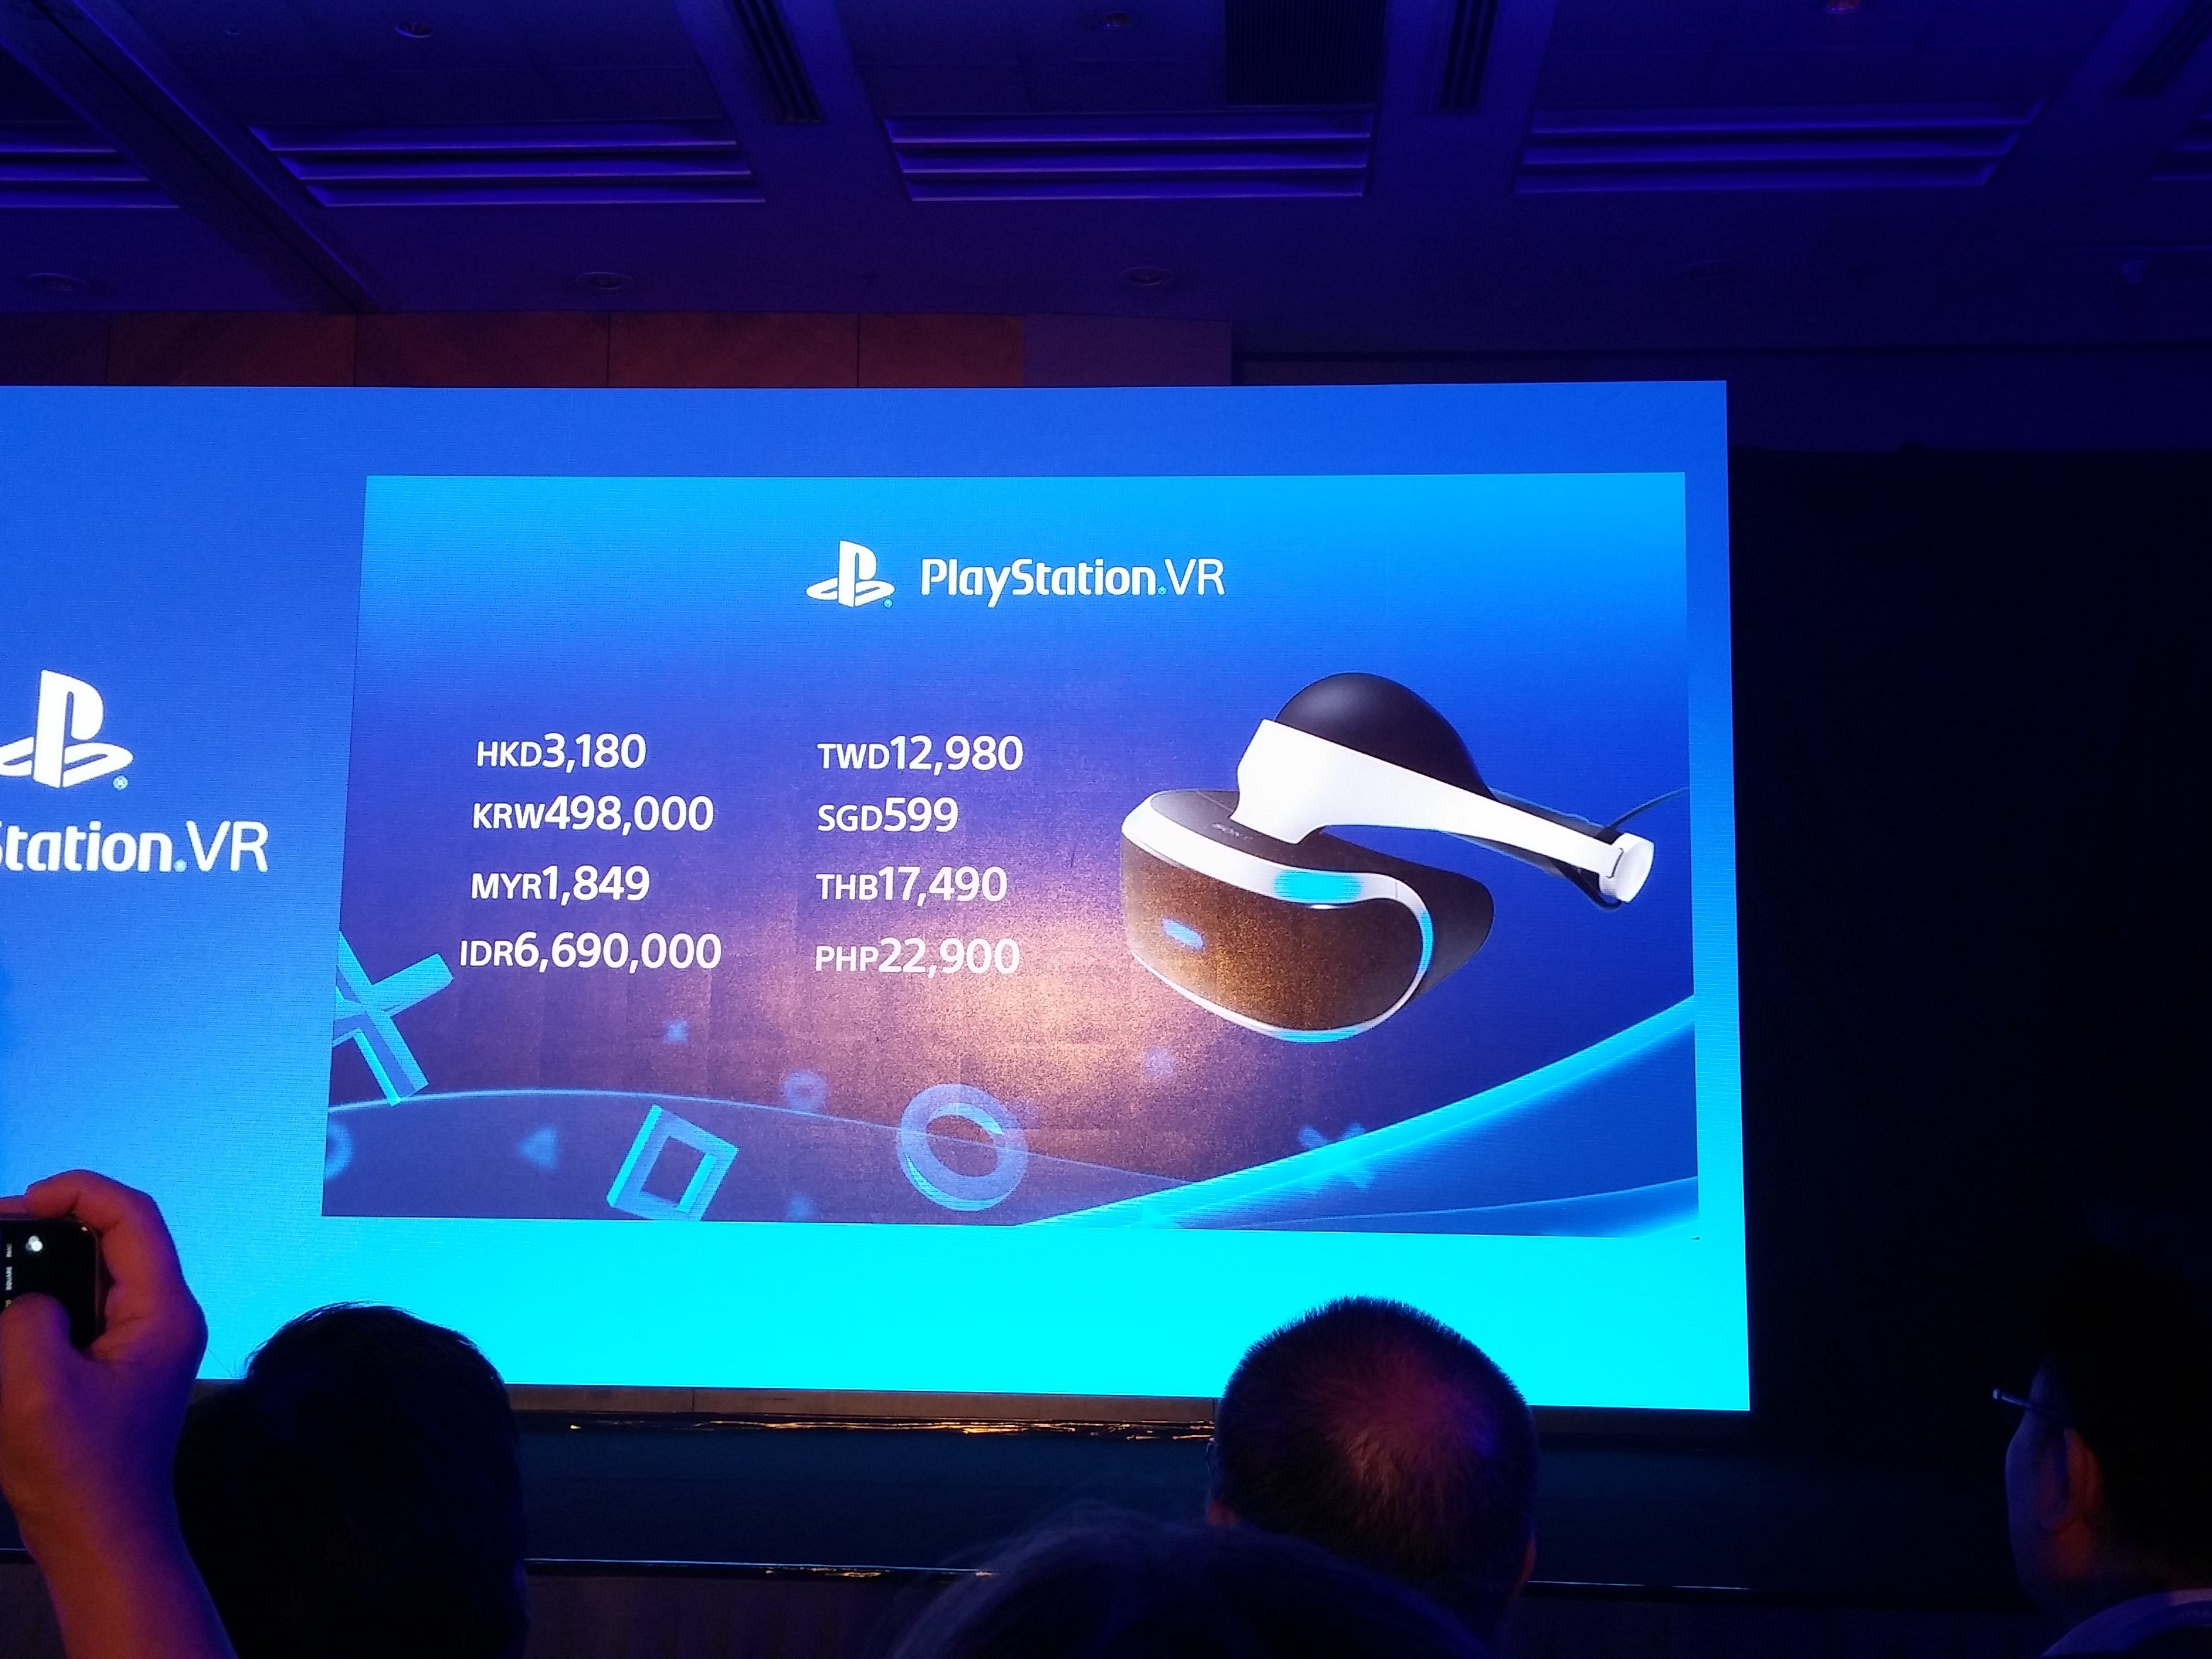 Pricing for the PlayStation VR unit 